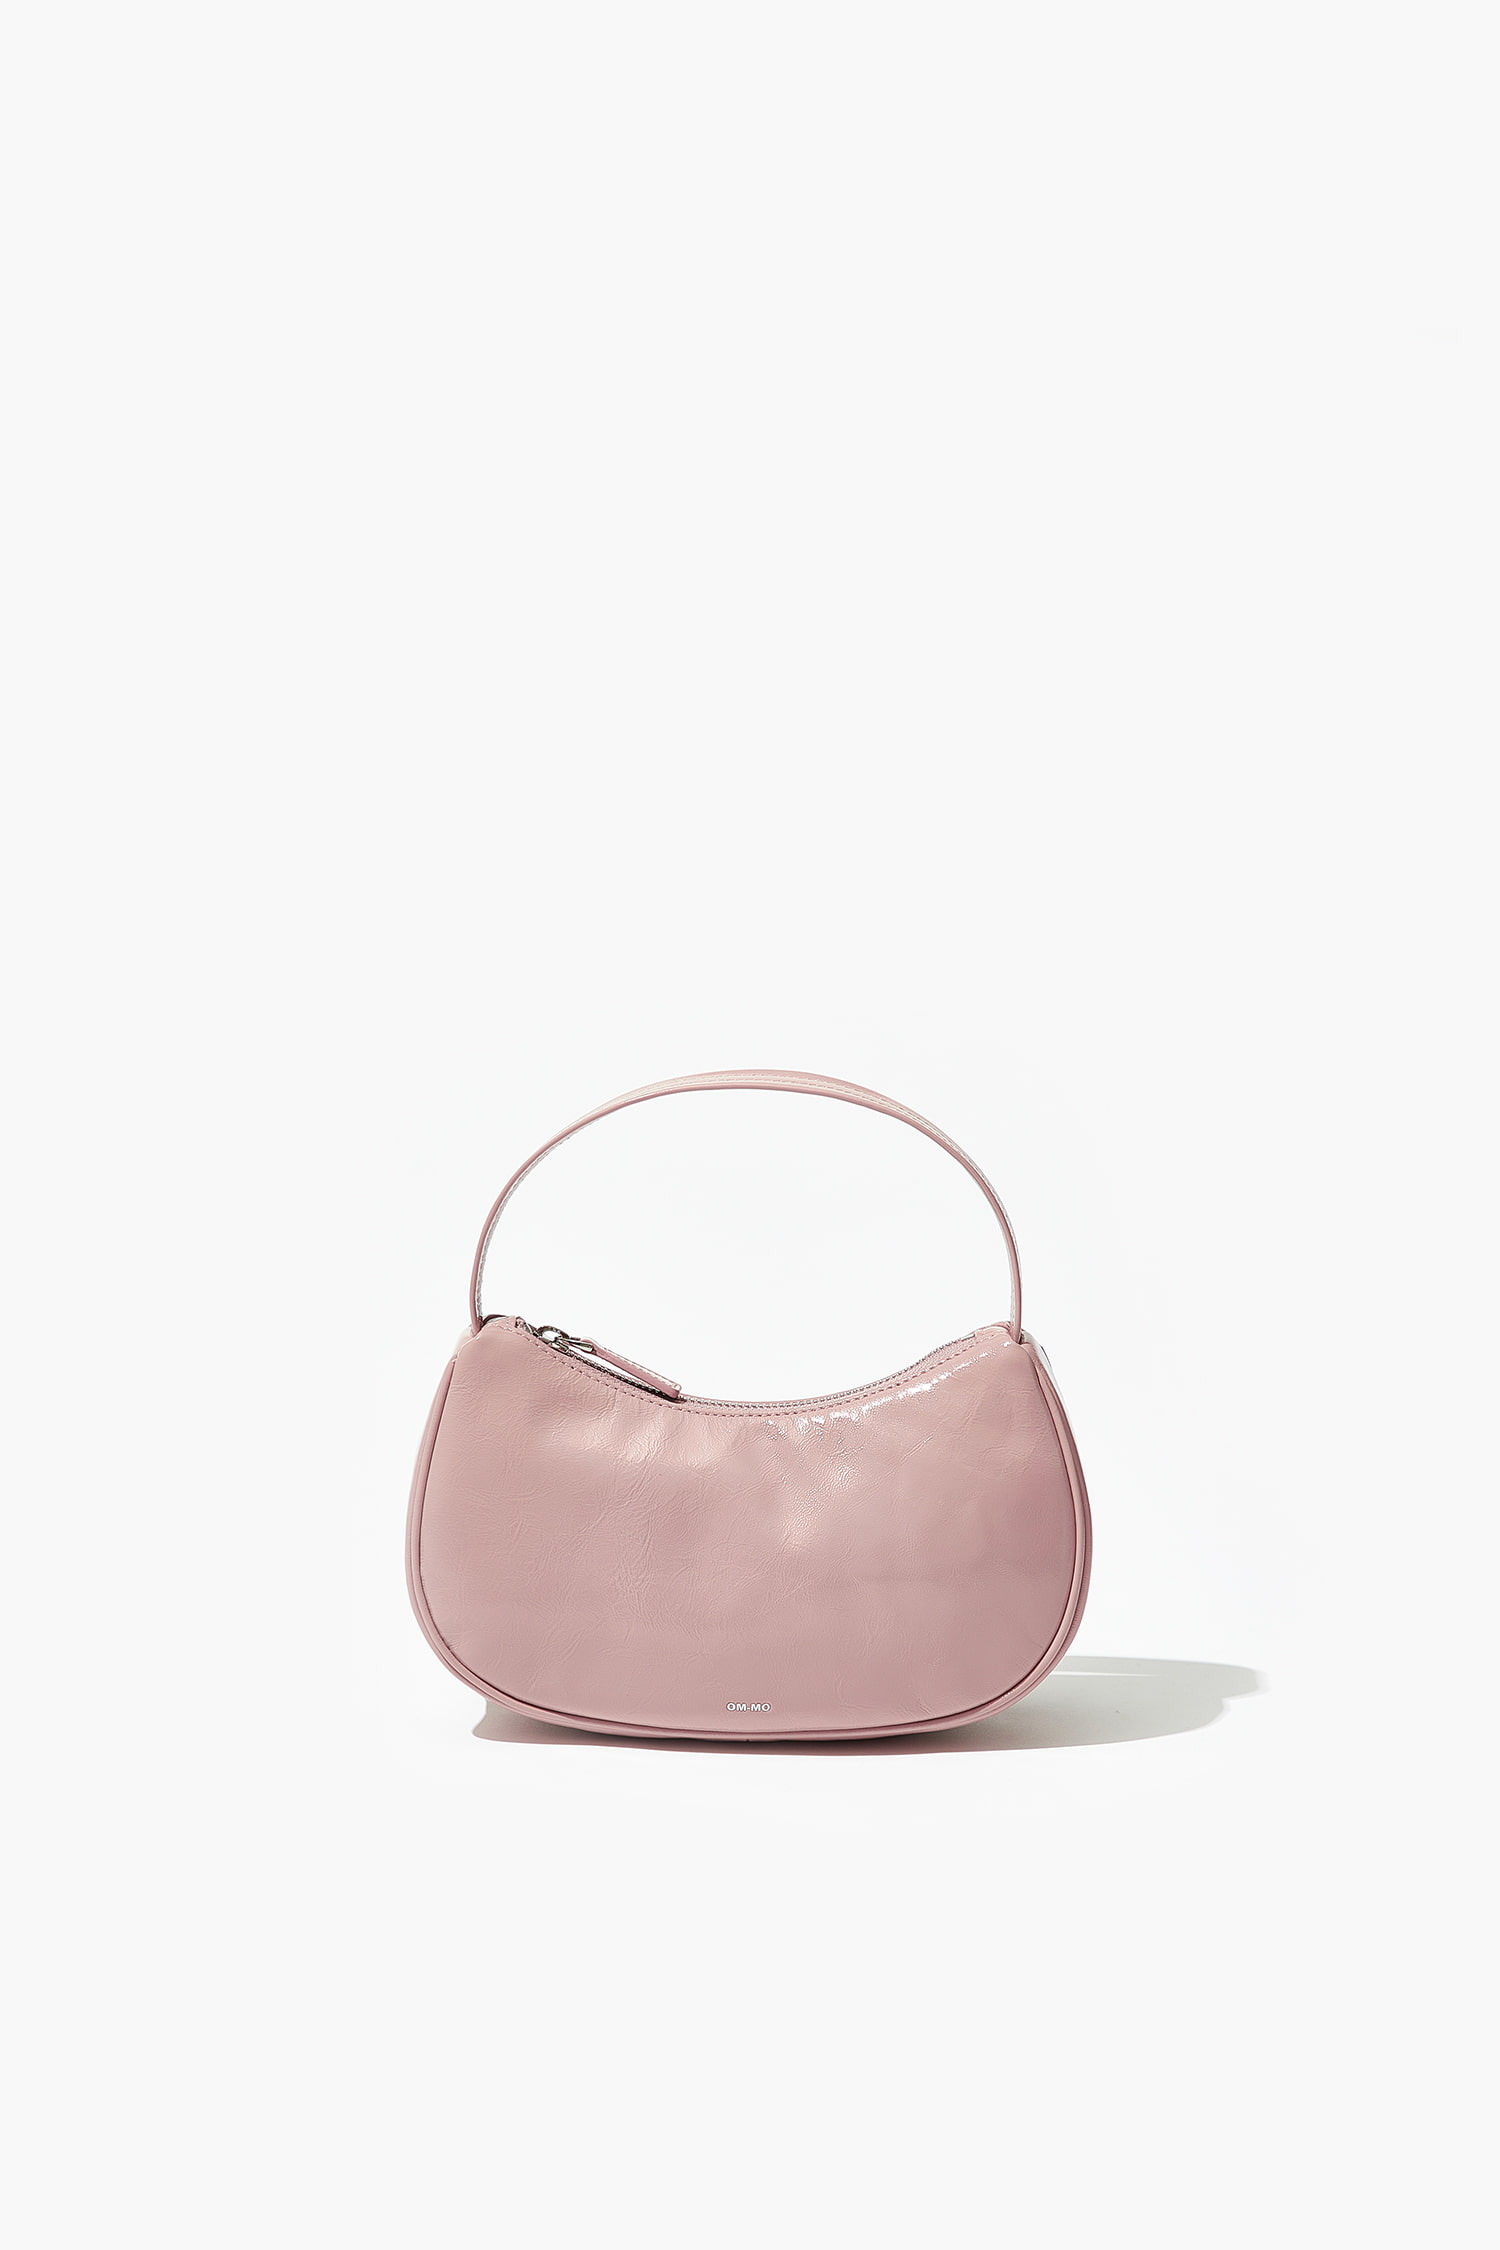 NUA BAG (DUST PINK) - GOAT PATENT LEATHER